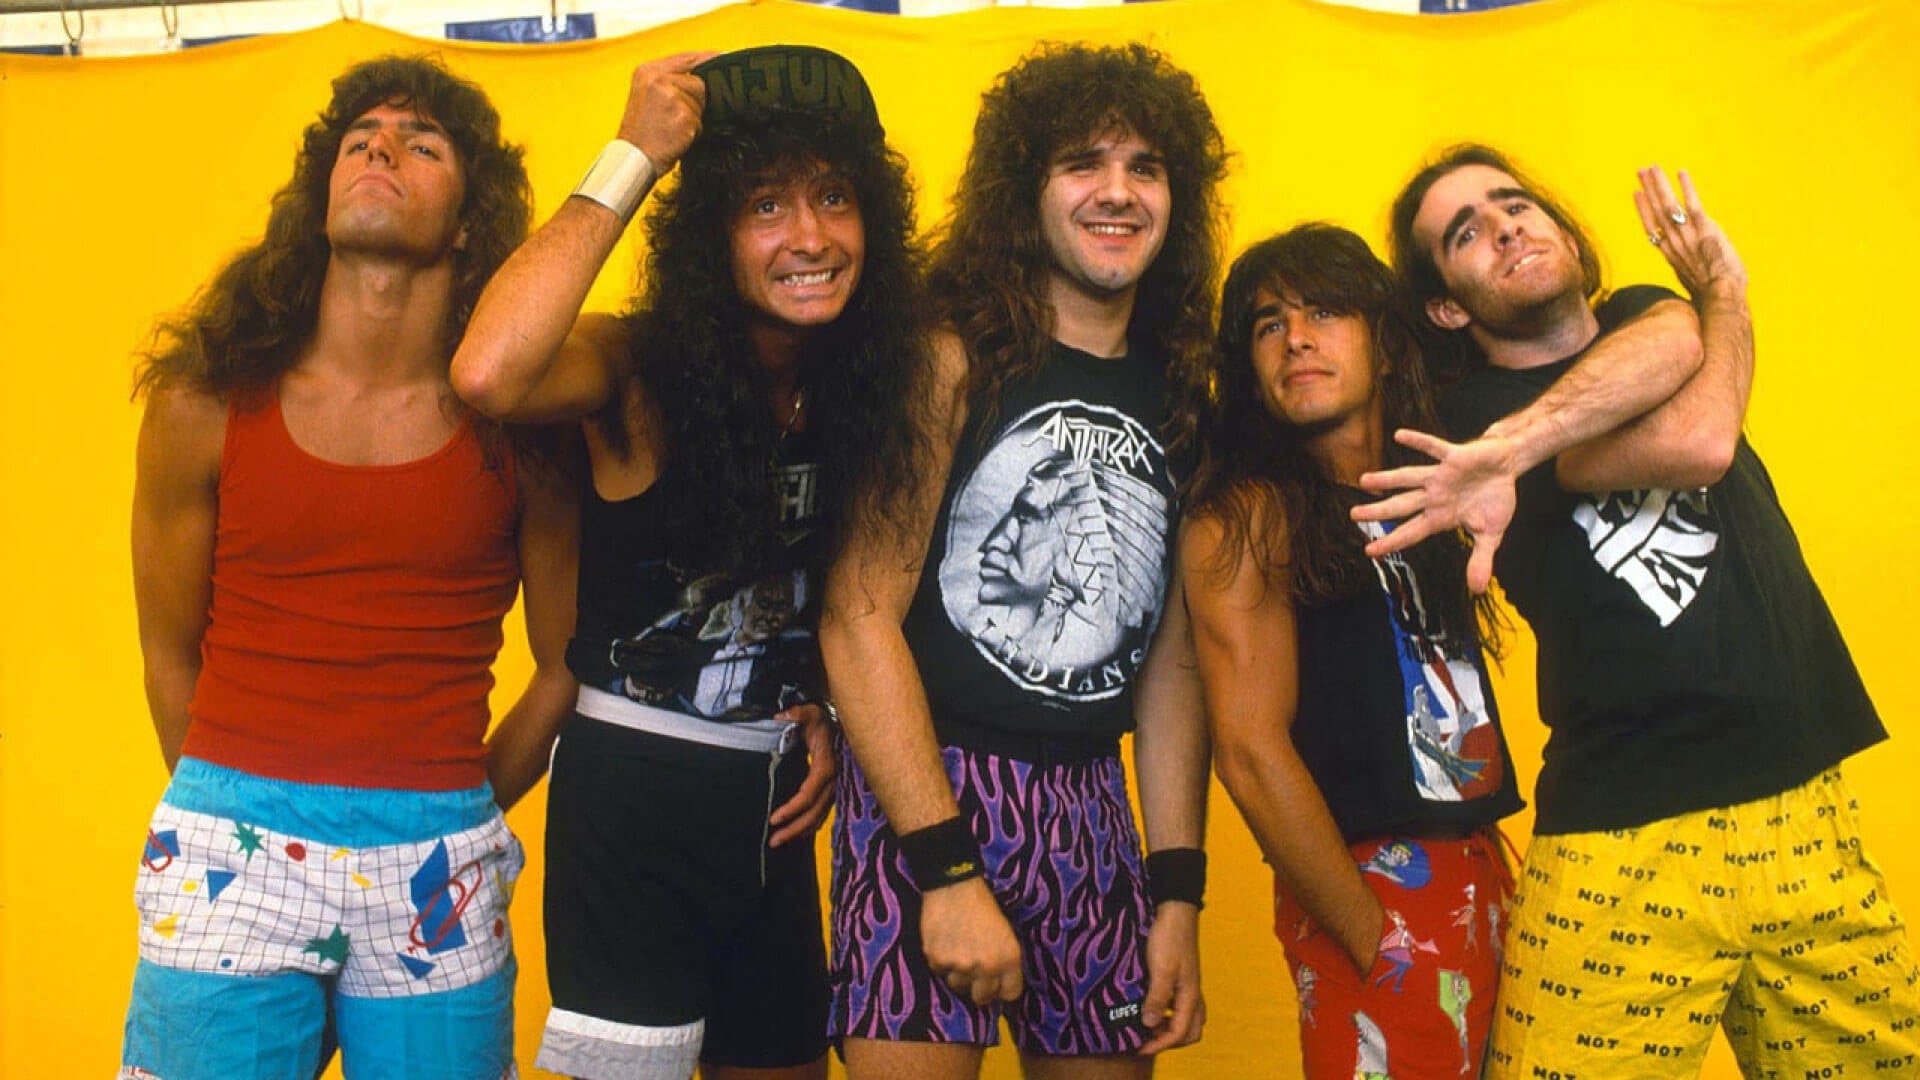 30 Years Ago: ANTHRAX Live at the Hammersmith Odeon, London